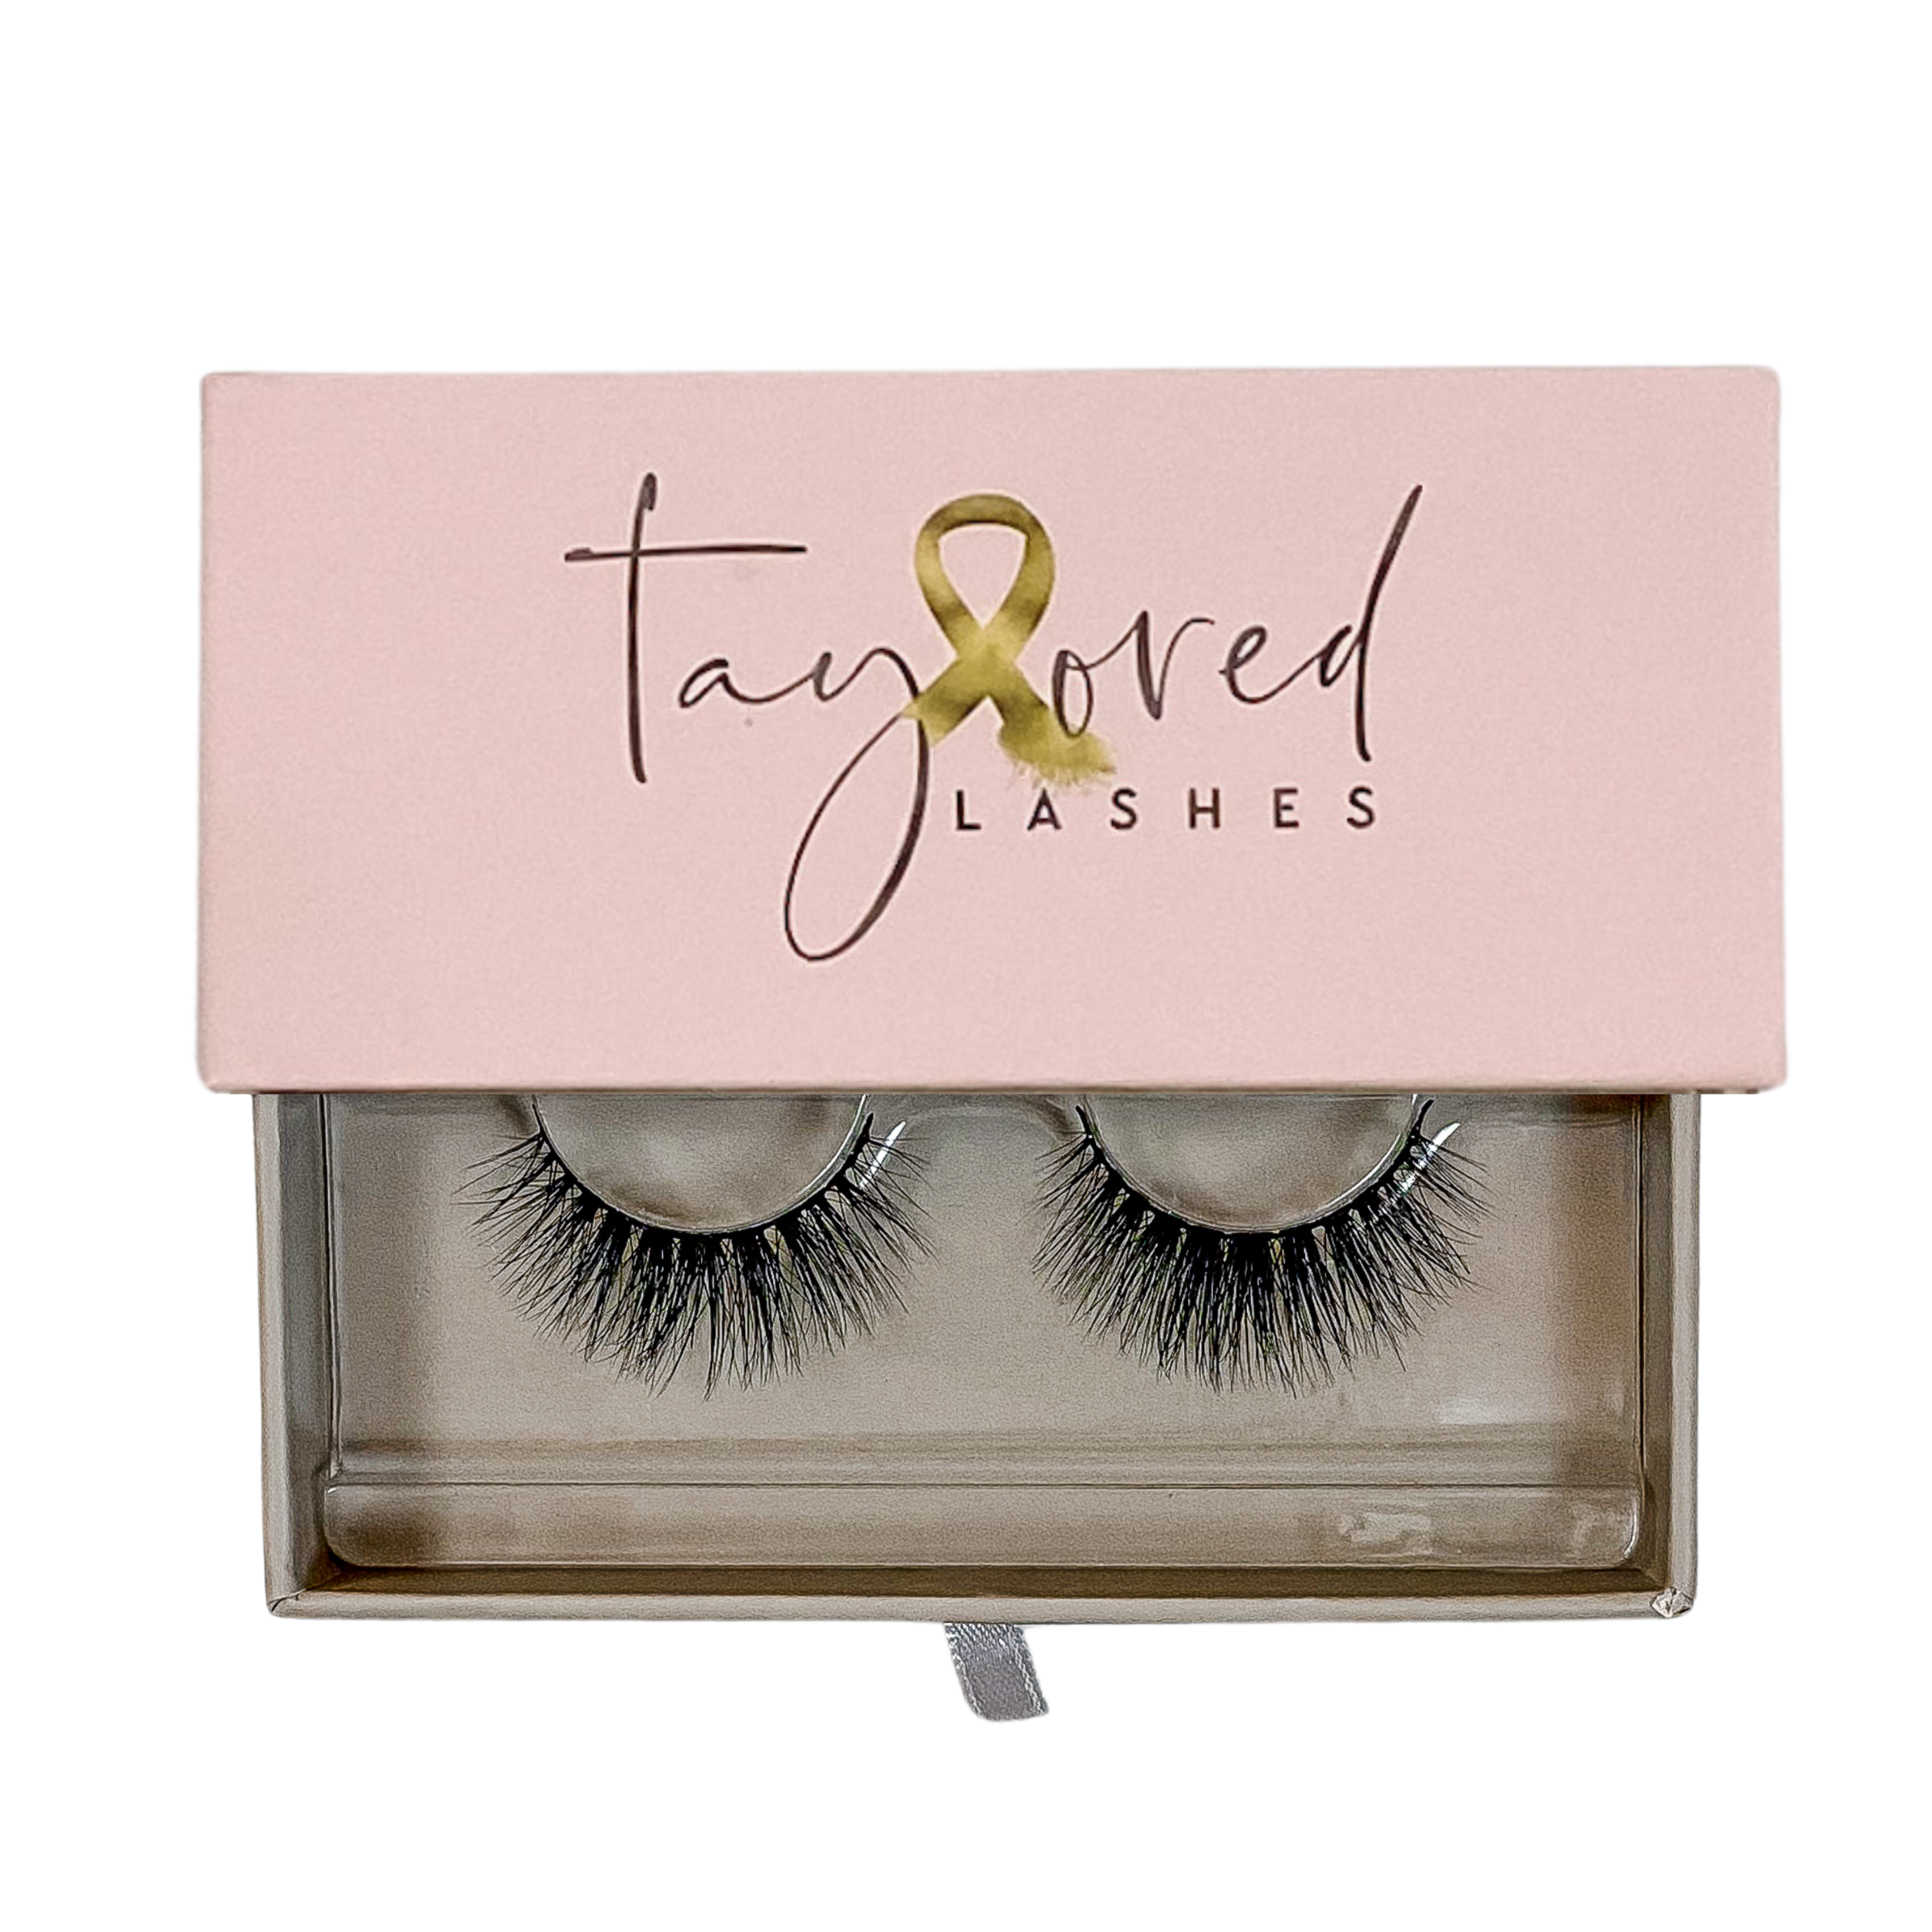 Hands On Top - Taylored Lashes™